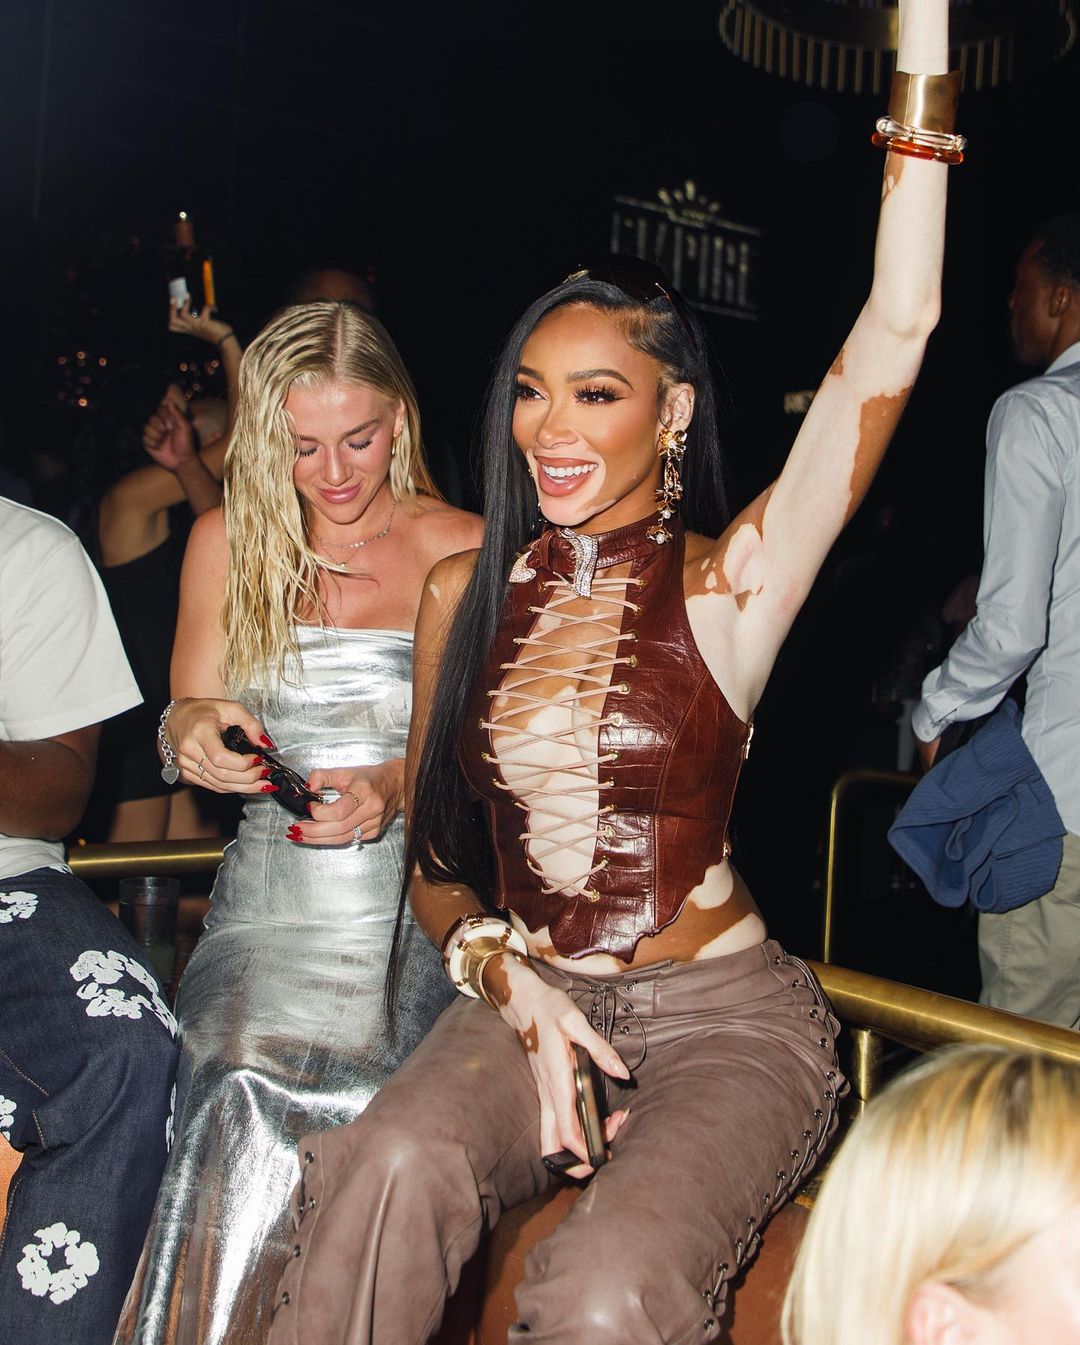 WINNIE HARLOW WEARS THE PHOEBE BROWN LEATHER TOP IN DUNDEE